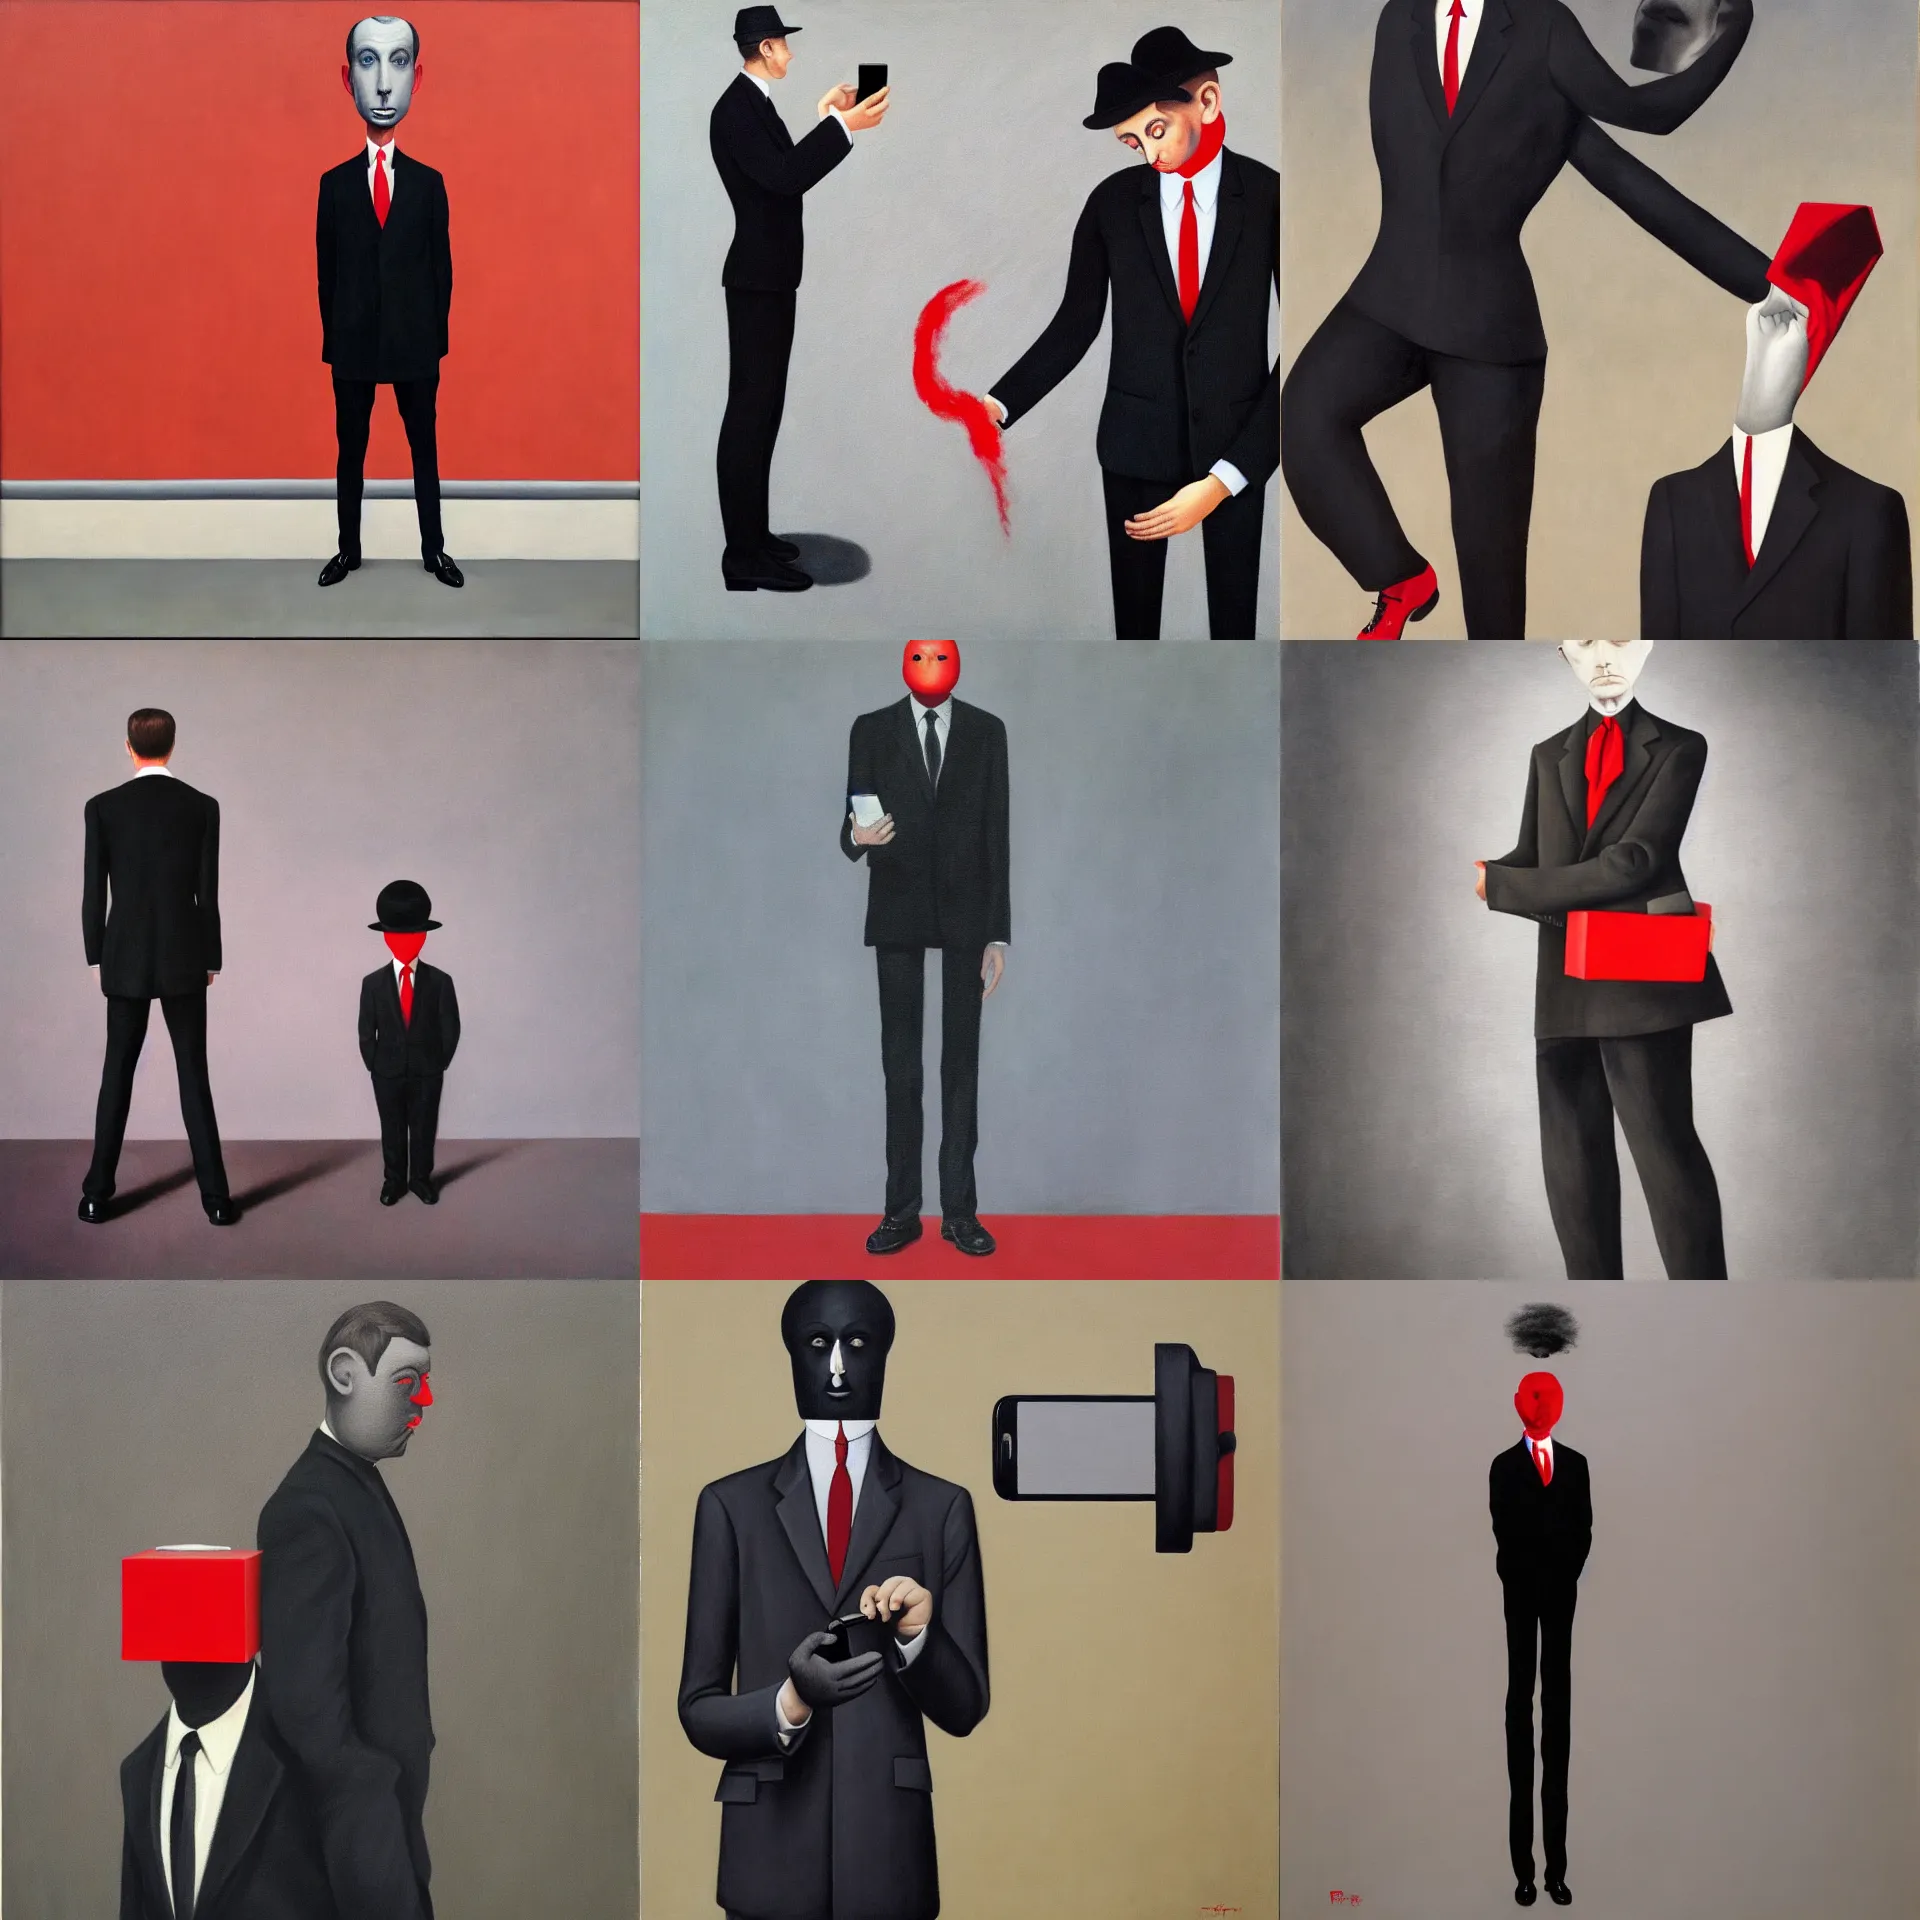 Prompt: front view full body oil painting of a man with an iphone replacing his face, wearing black grey suit, red tie, black pants, dark shoes painted by rene magritte